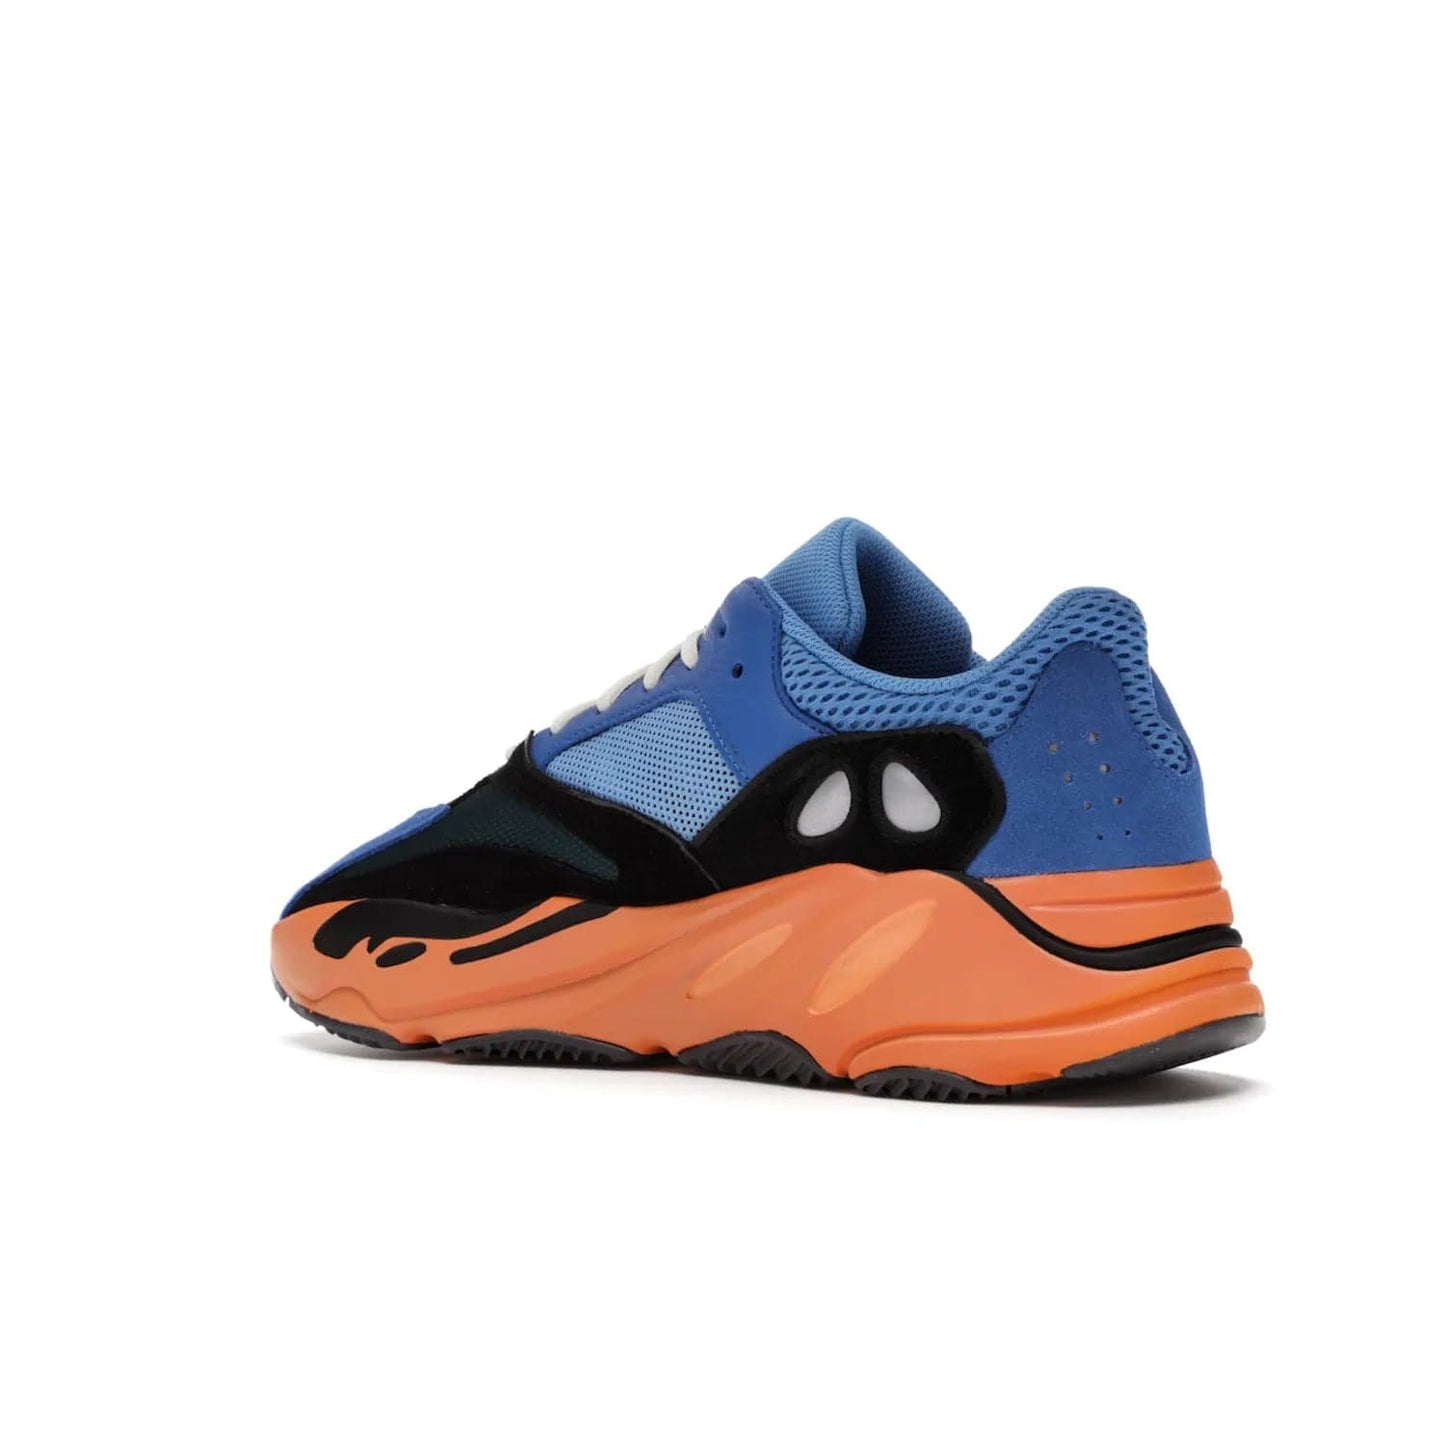 adidas Yeezy Boost 700 Bright Blue - Image 23 - Only at www.BallersClubKickz.com - Iconic sneaker style meets vibrant colour with the adidas Yeezy Boost 700 Bright Blue. Reflective accents, turquoise and teal panels, bright orange midsole and black outsole make for a bold release. April 2021.